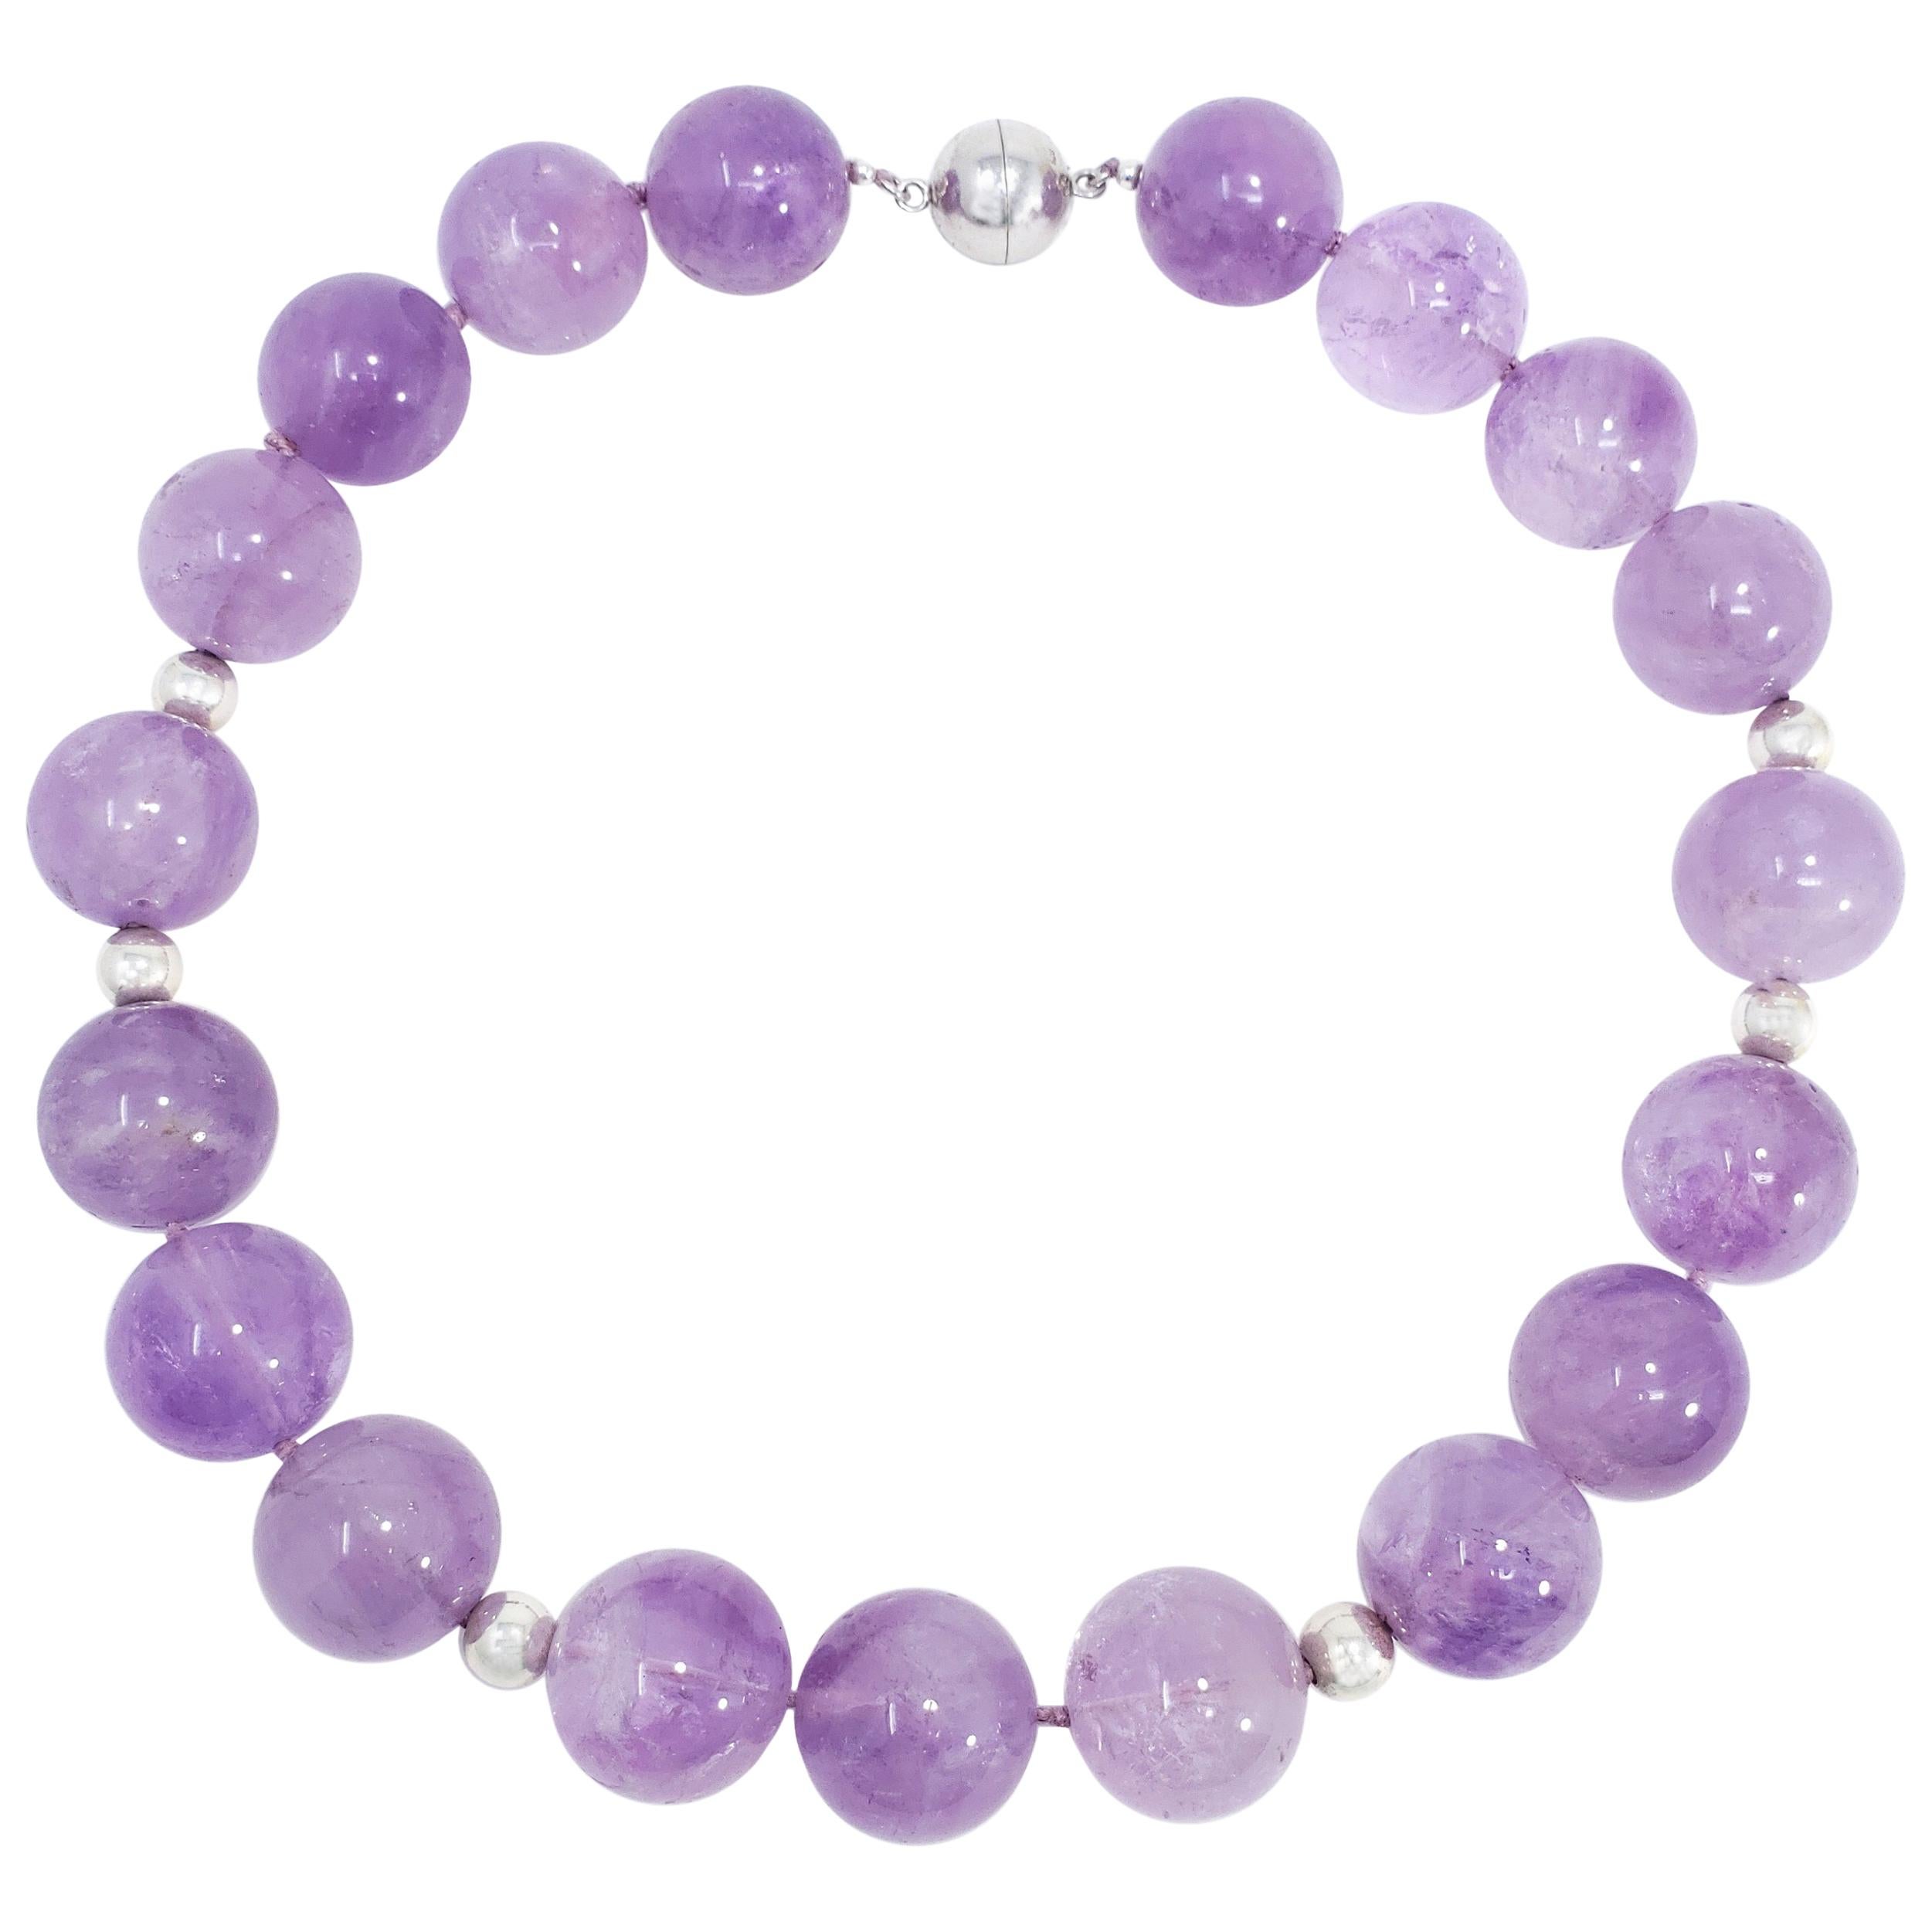 Long 36"10mm Russican Amethyst Round beads Necklace